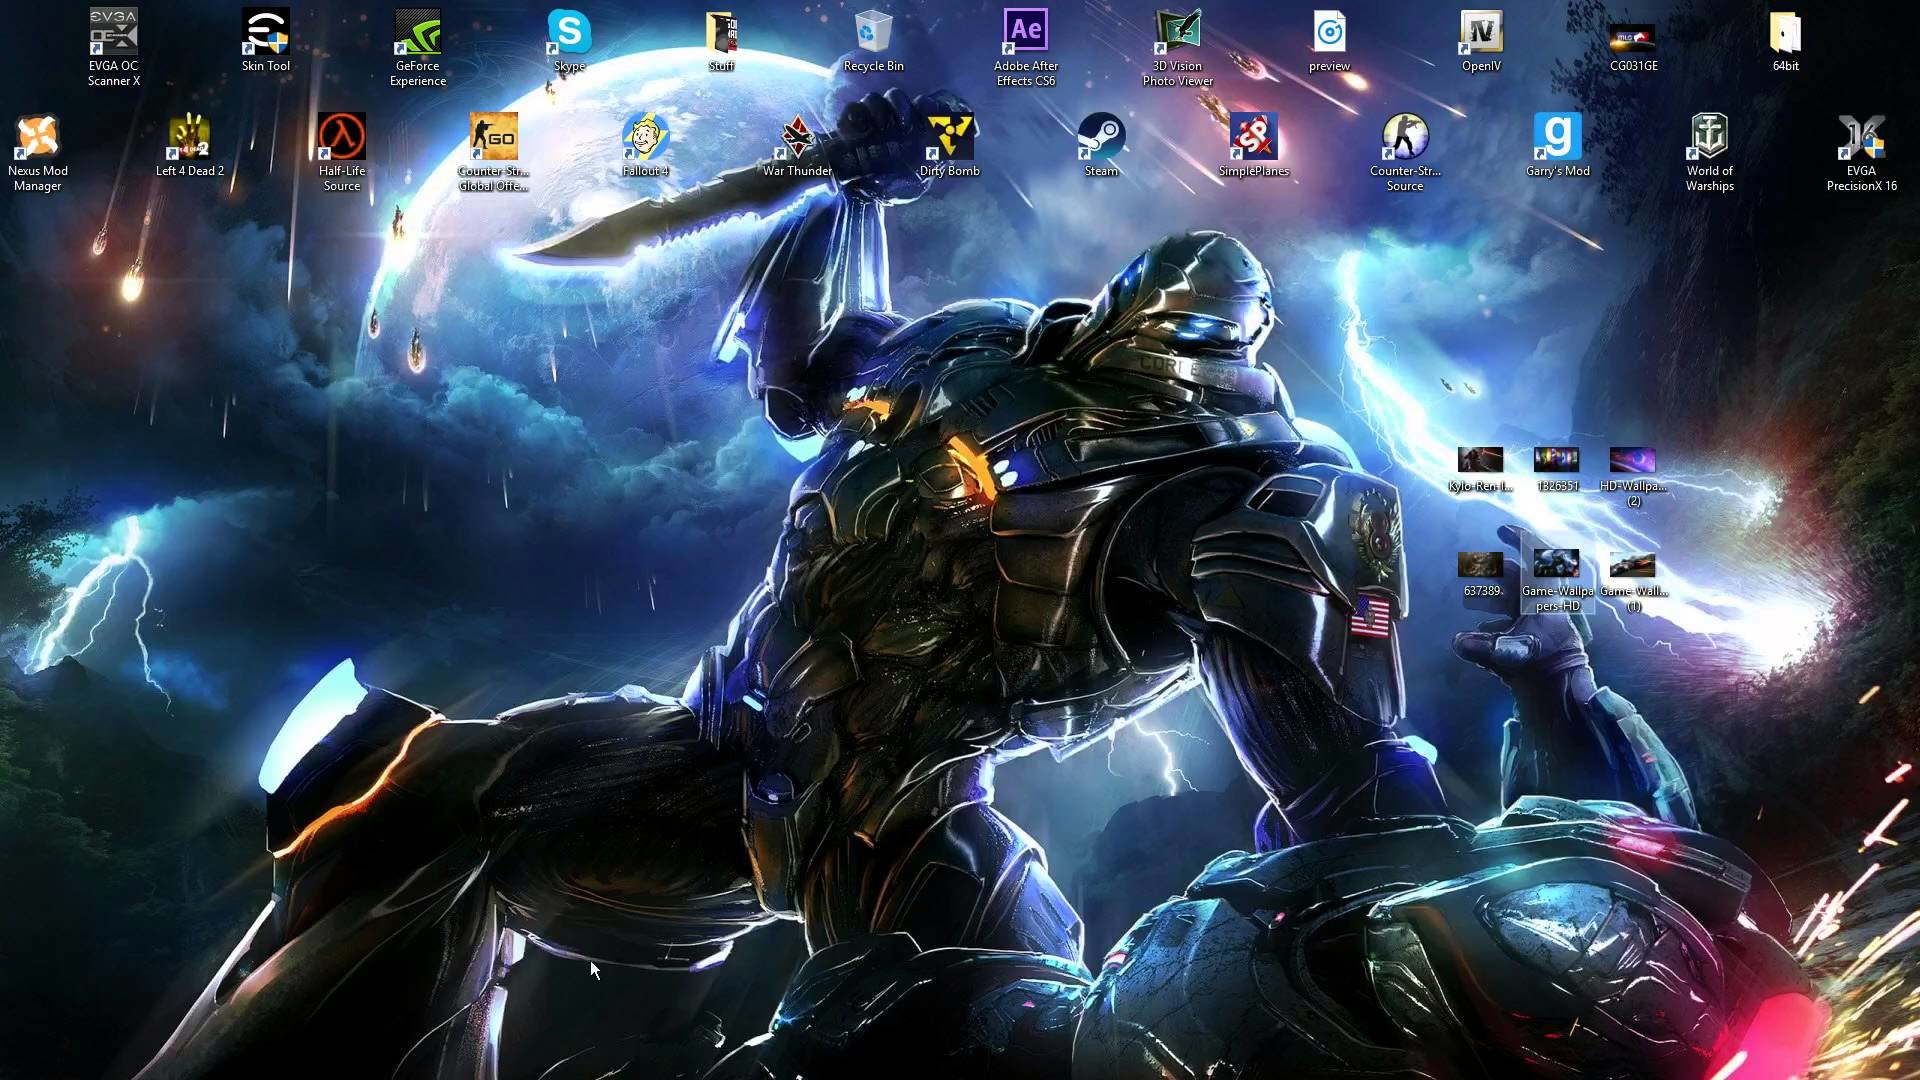 1920x1080 Cool Desktop Backgrounds For Gamers